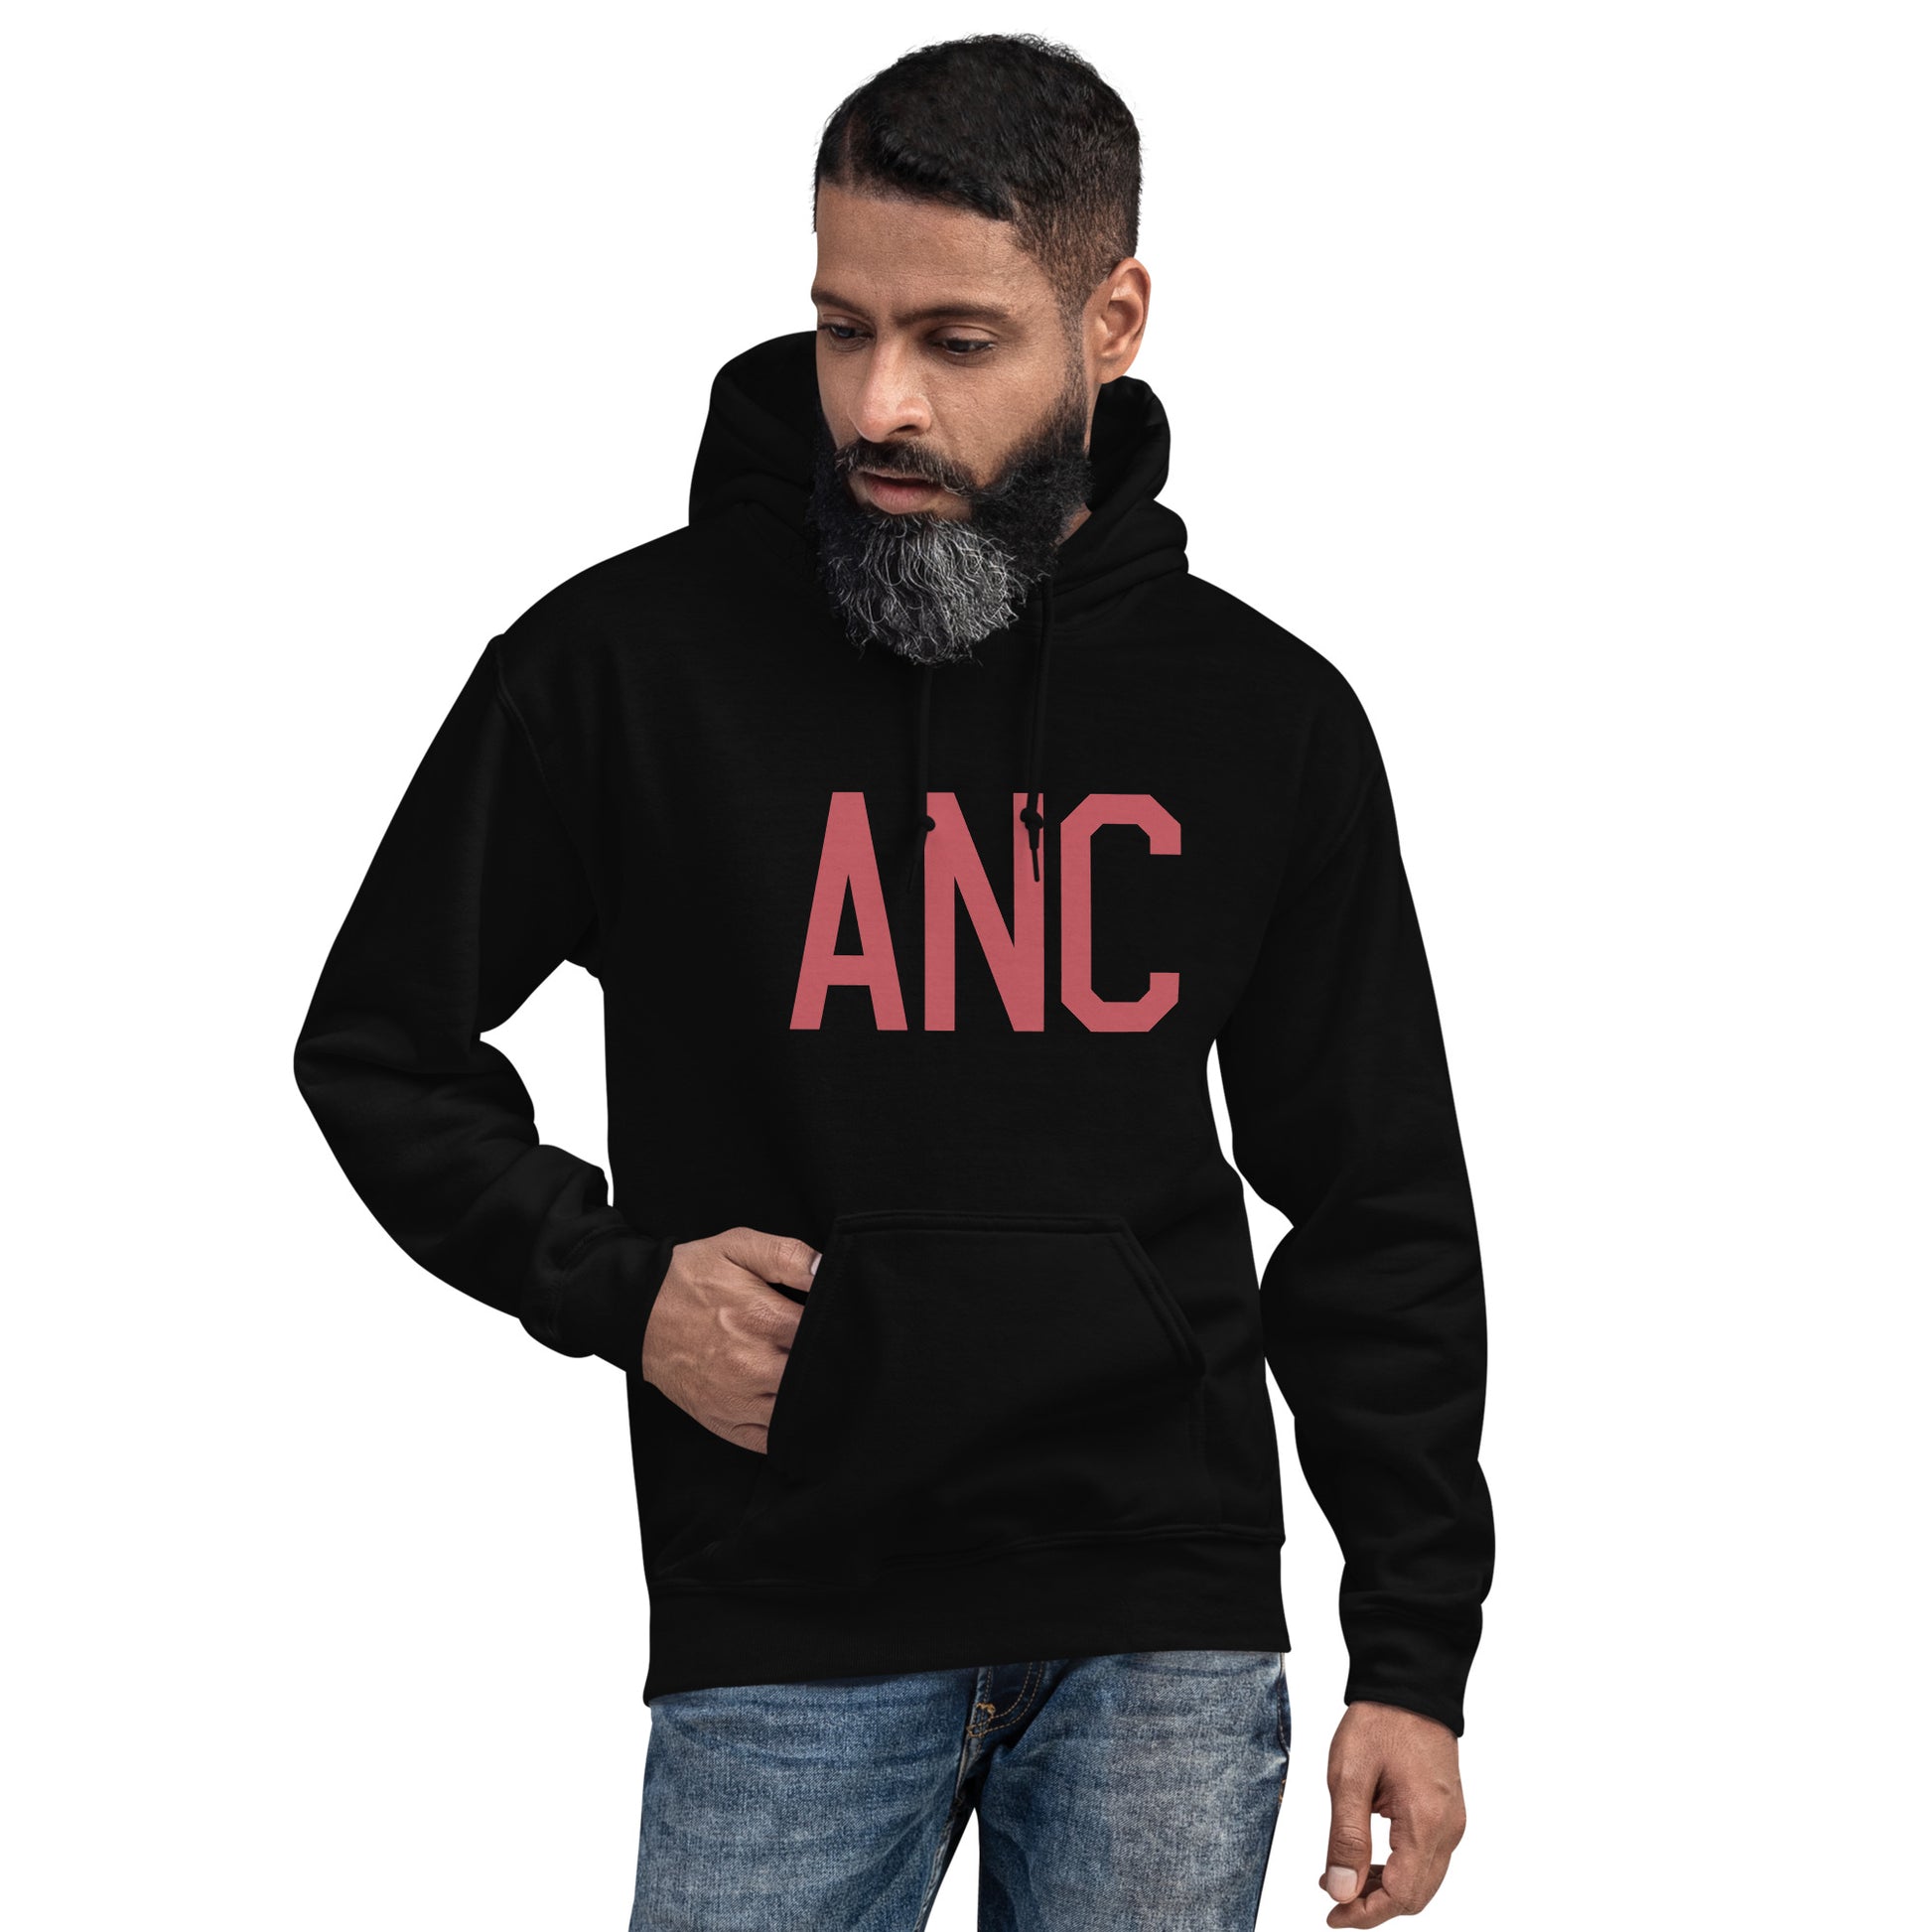 Aviation Enthusiast Hoodie - Deep Pink Graphic • ANC Anchorage • YHM Designs - Image 05